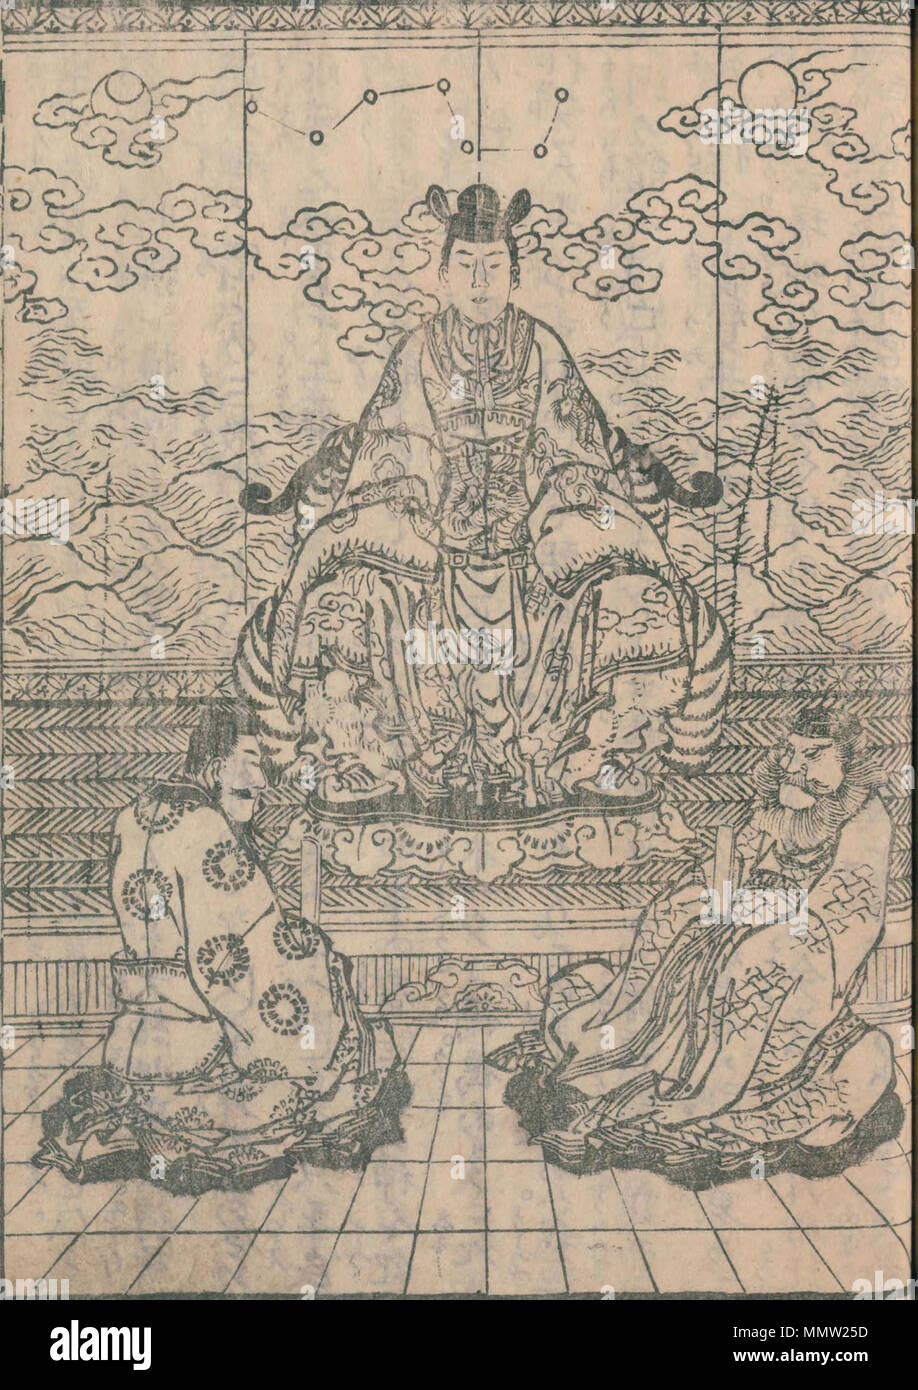 English: The enthronement of Sutemaru, later the Chuzan King